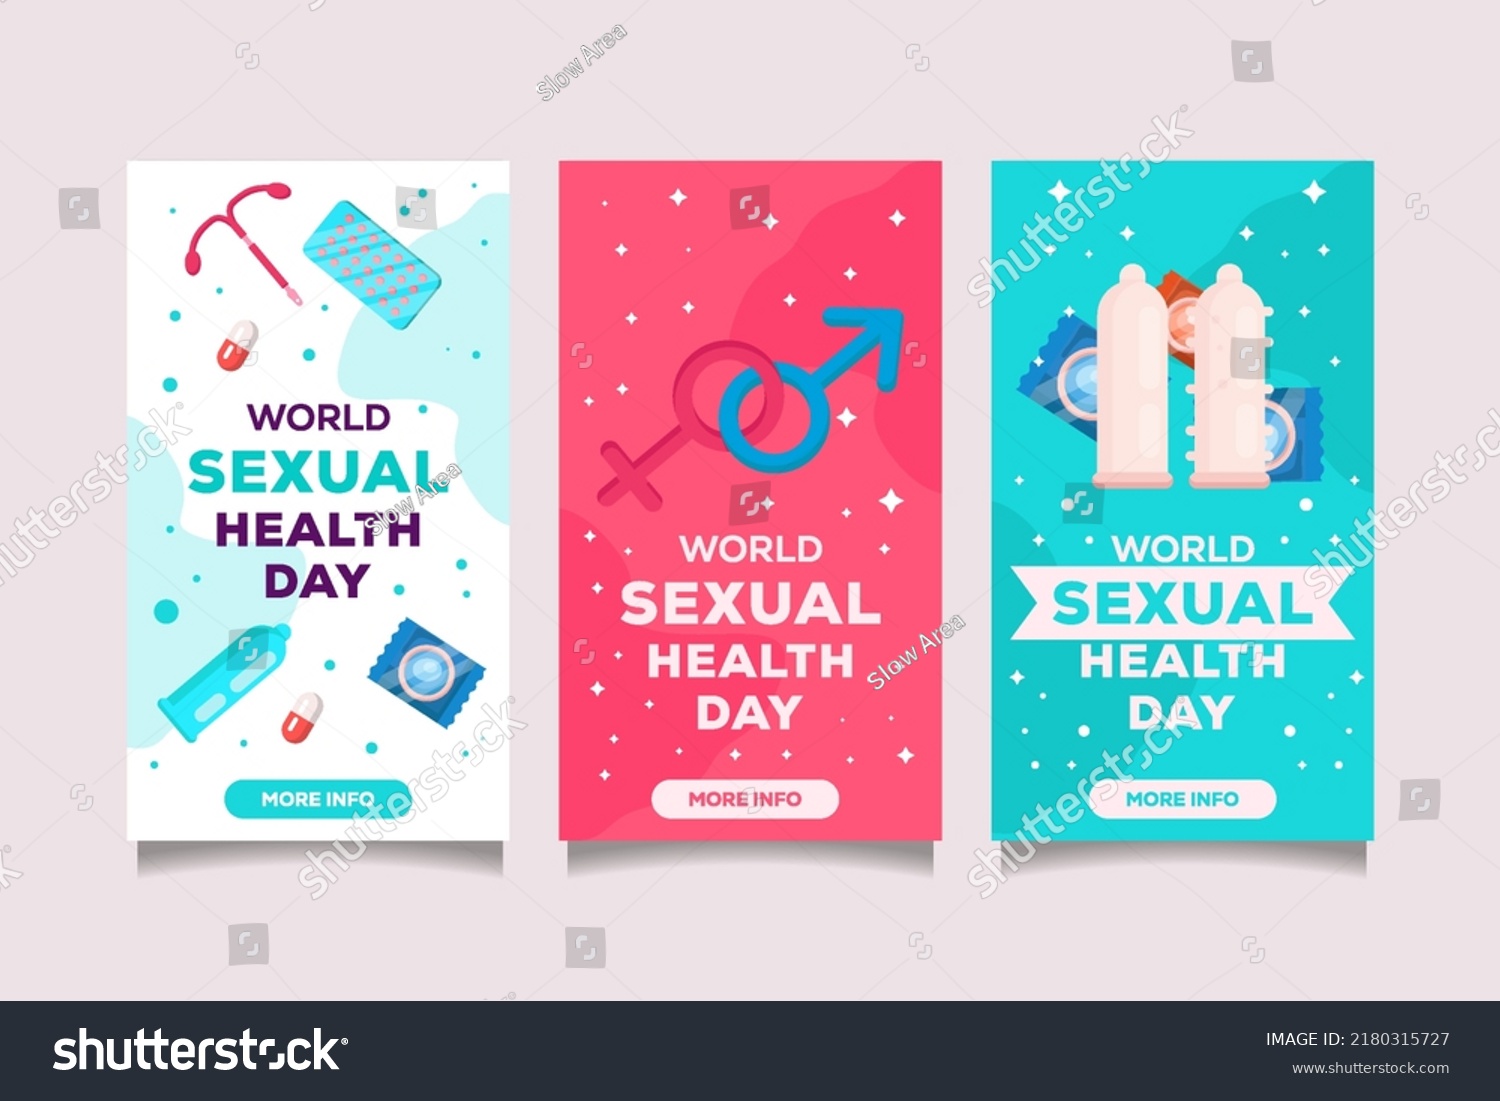 Vertical Banner World Sexual Health Day Stock Vector Royalty Free 2180315727 Shutterstock 